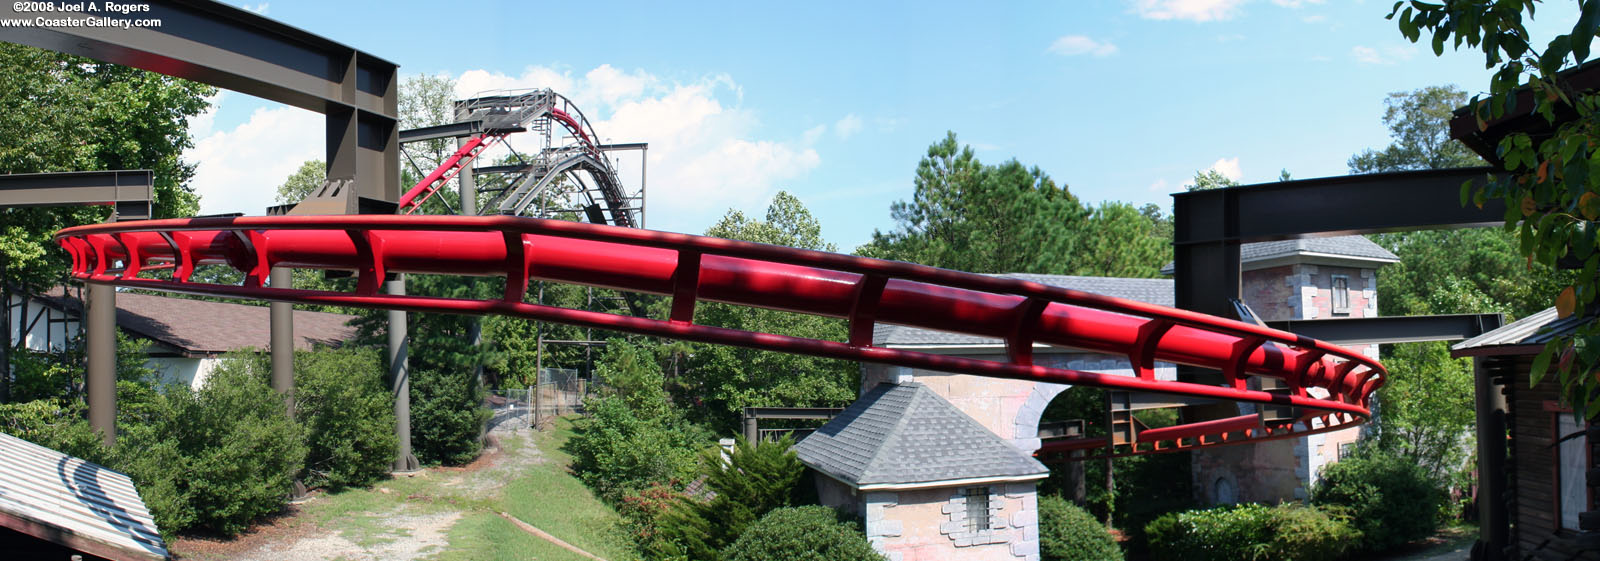 Panorama image of the Big Bad Wolf roller coaster